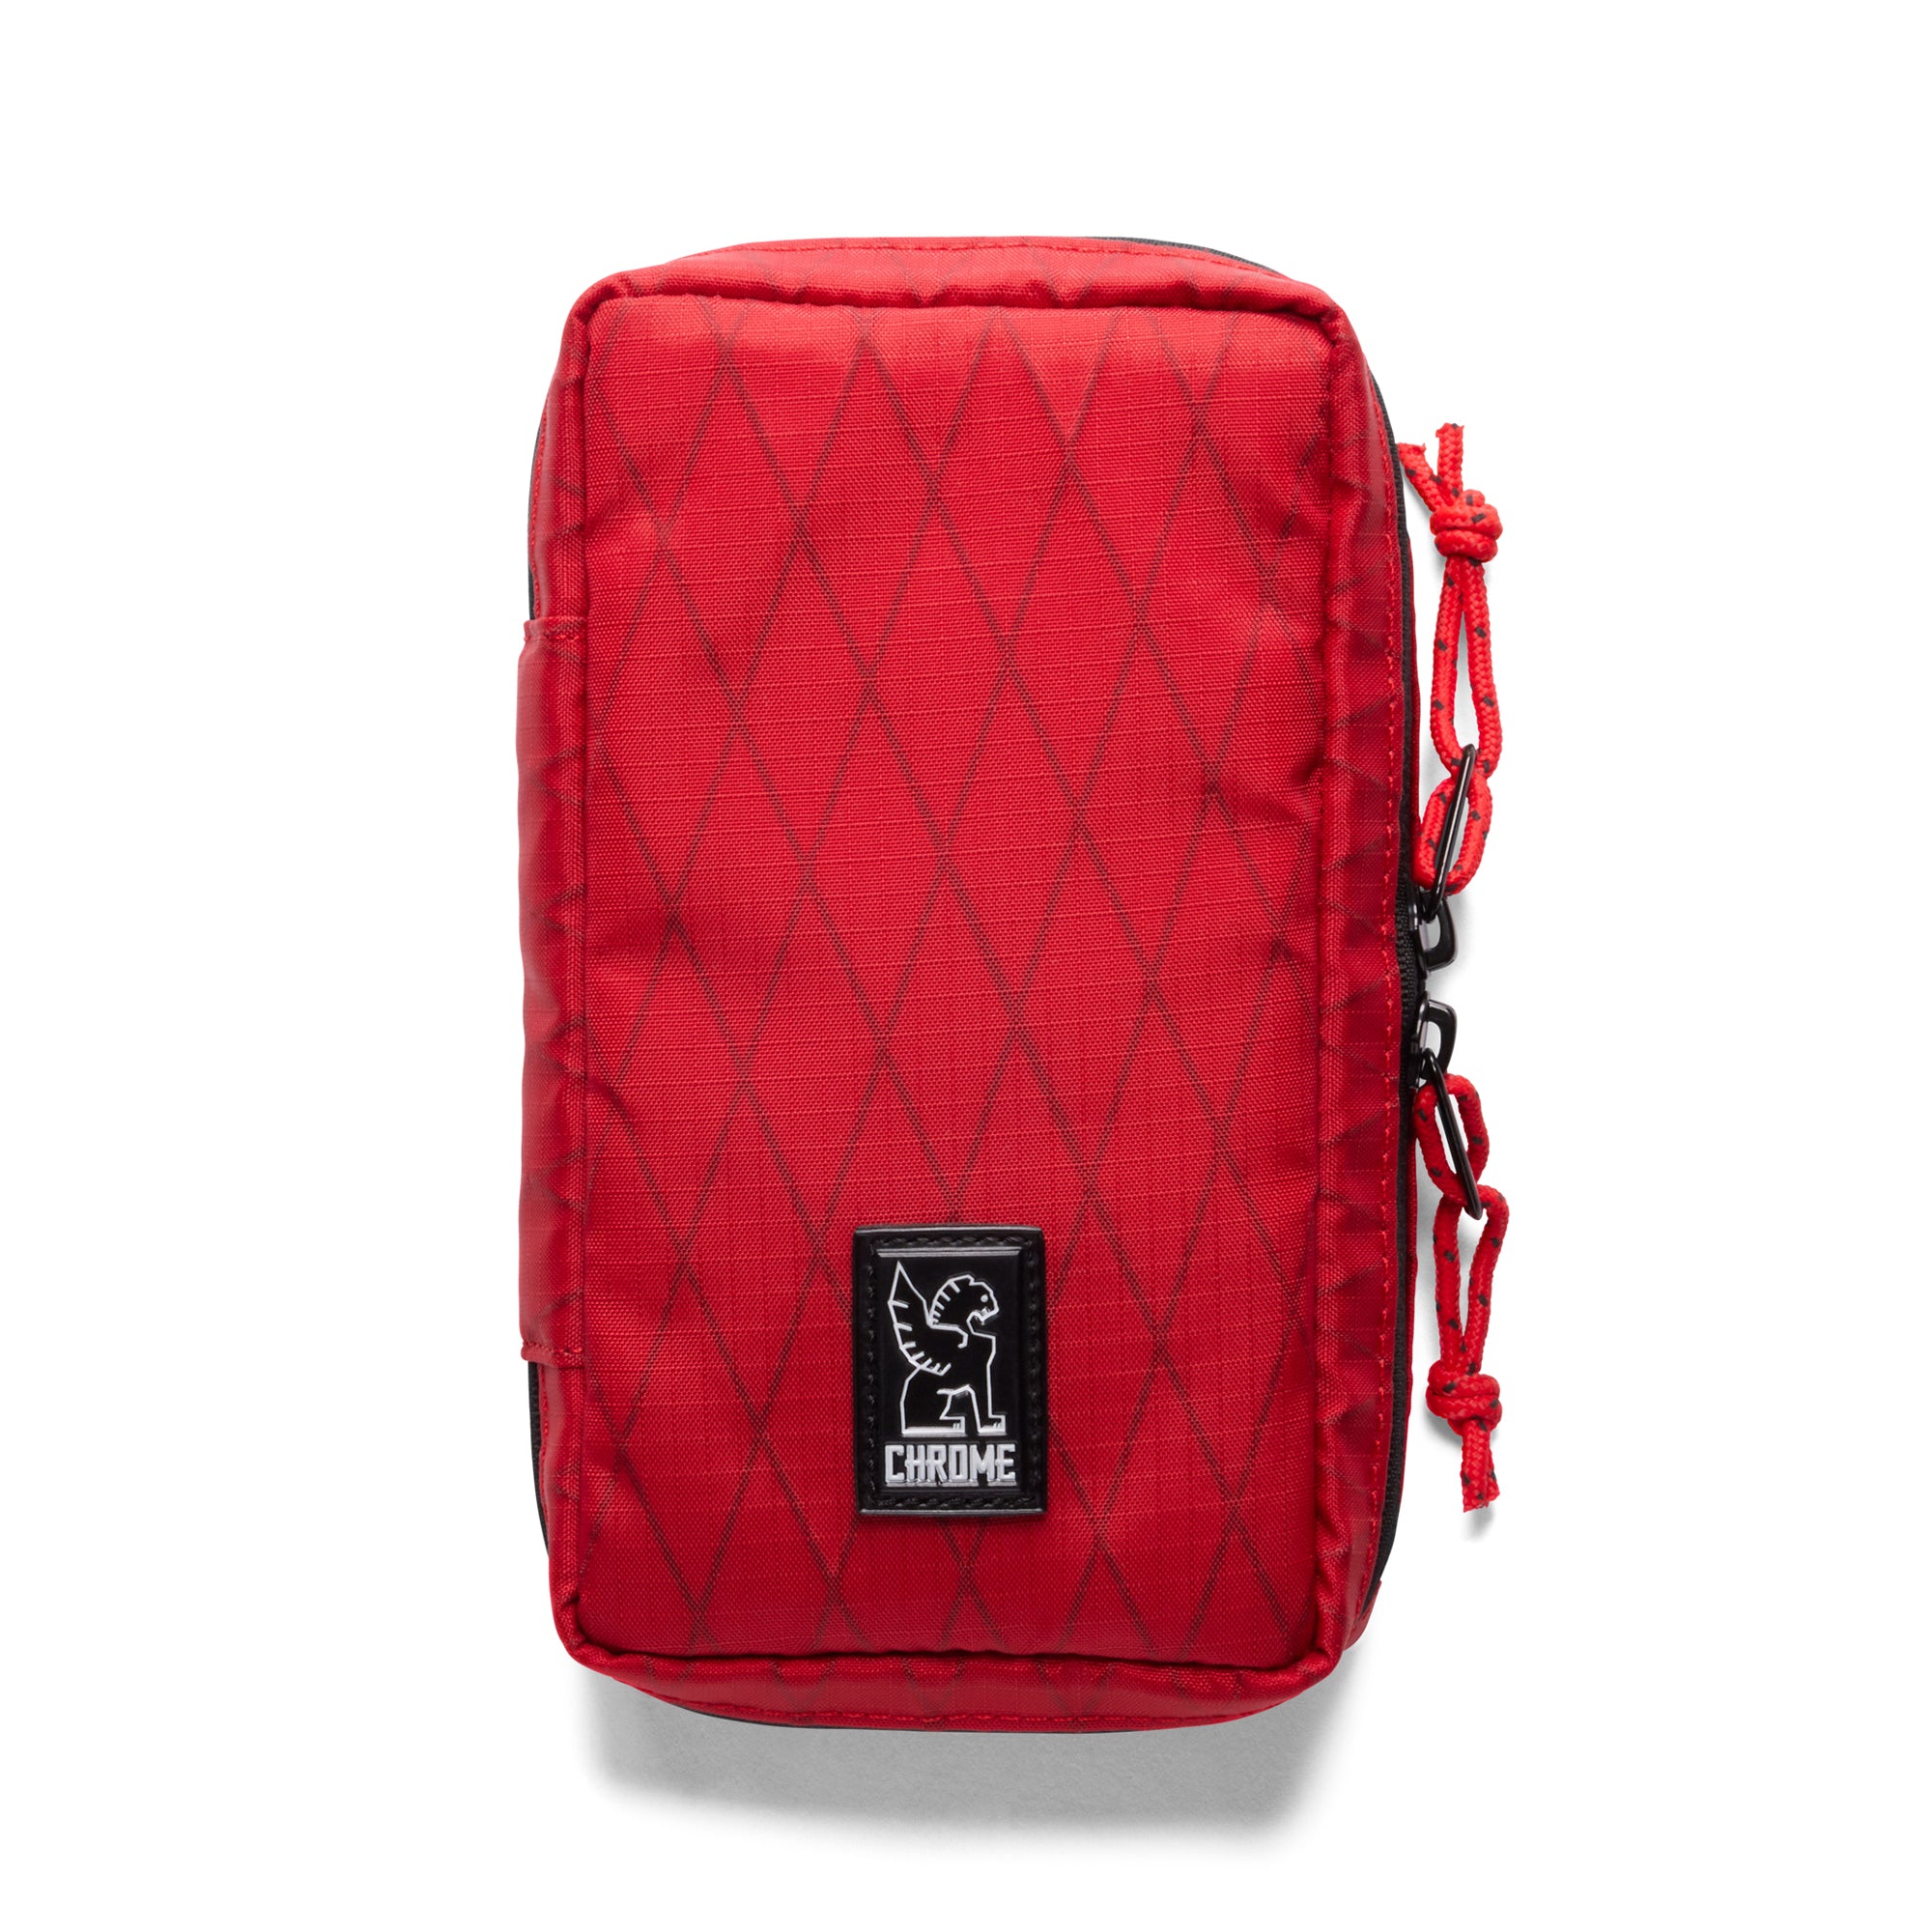 Tech Accessory pouch in red x fabric #color_red x